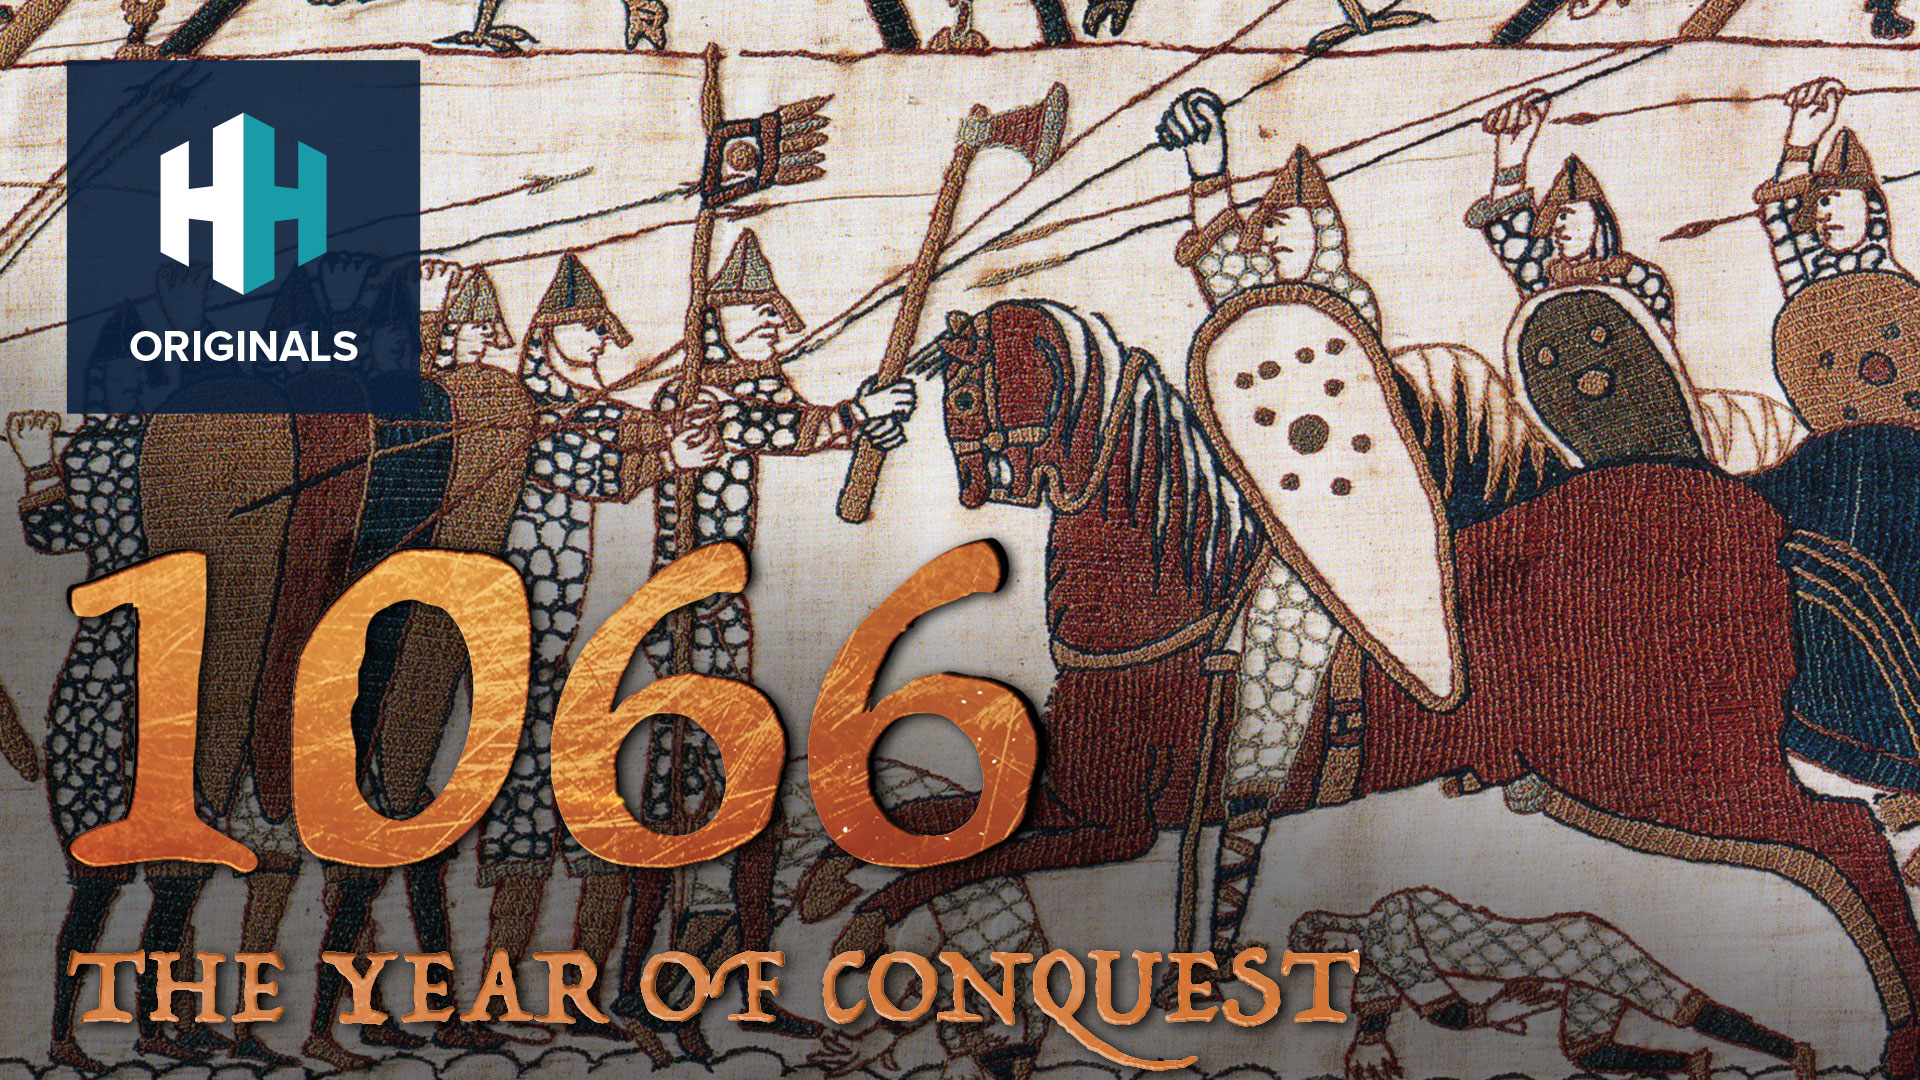 david howarth 1066 the year of the conquest